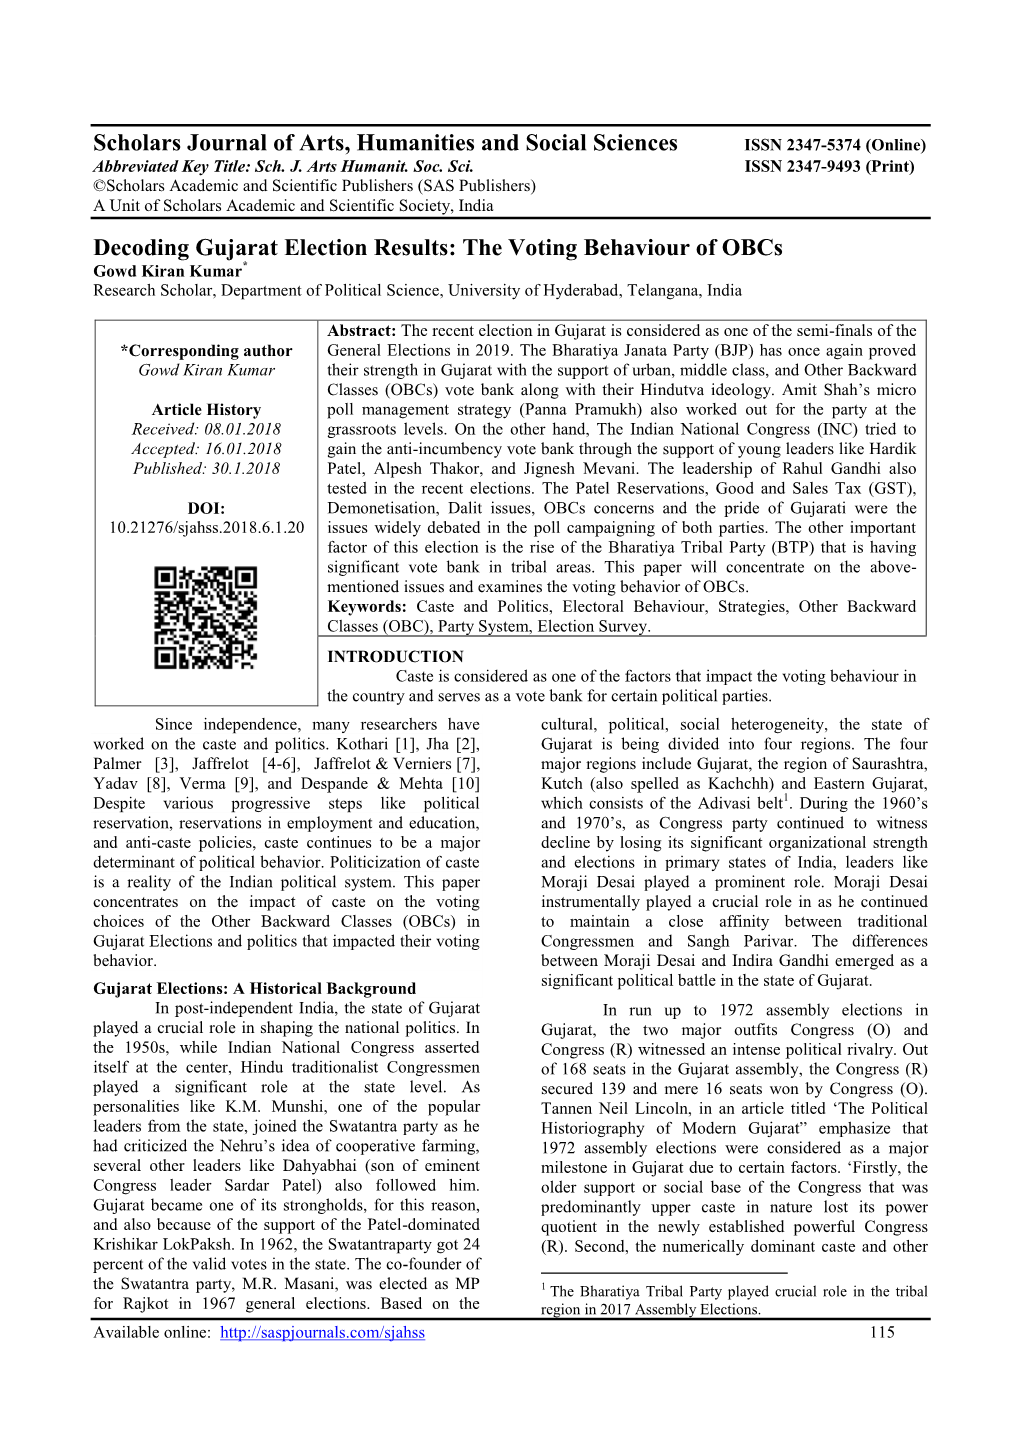 Scholars Journal of Arts, Humanities and Social Sciences Decoding Gujarat Election Results: the Voting Behaviour of Obcs